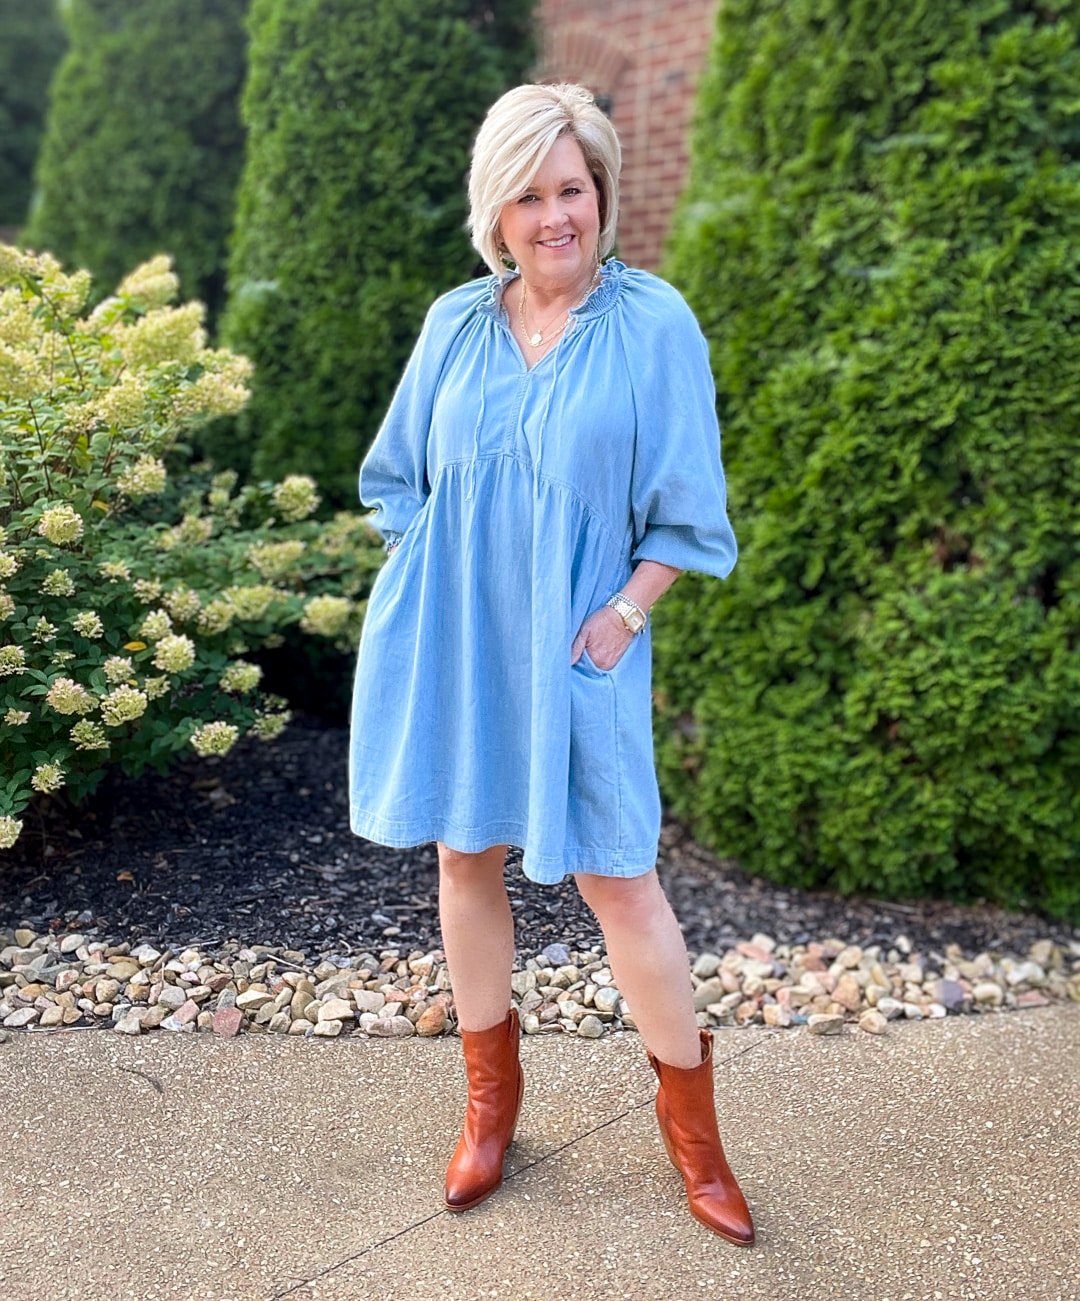 Over 40 Fashion Blogger, Tania Stephens is styling Old Navy Fall Dresses with western boots27